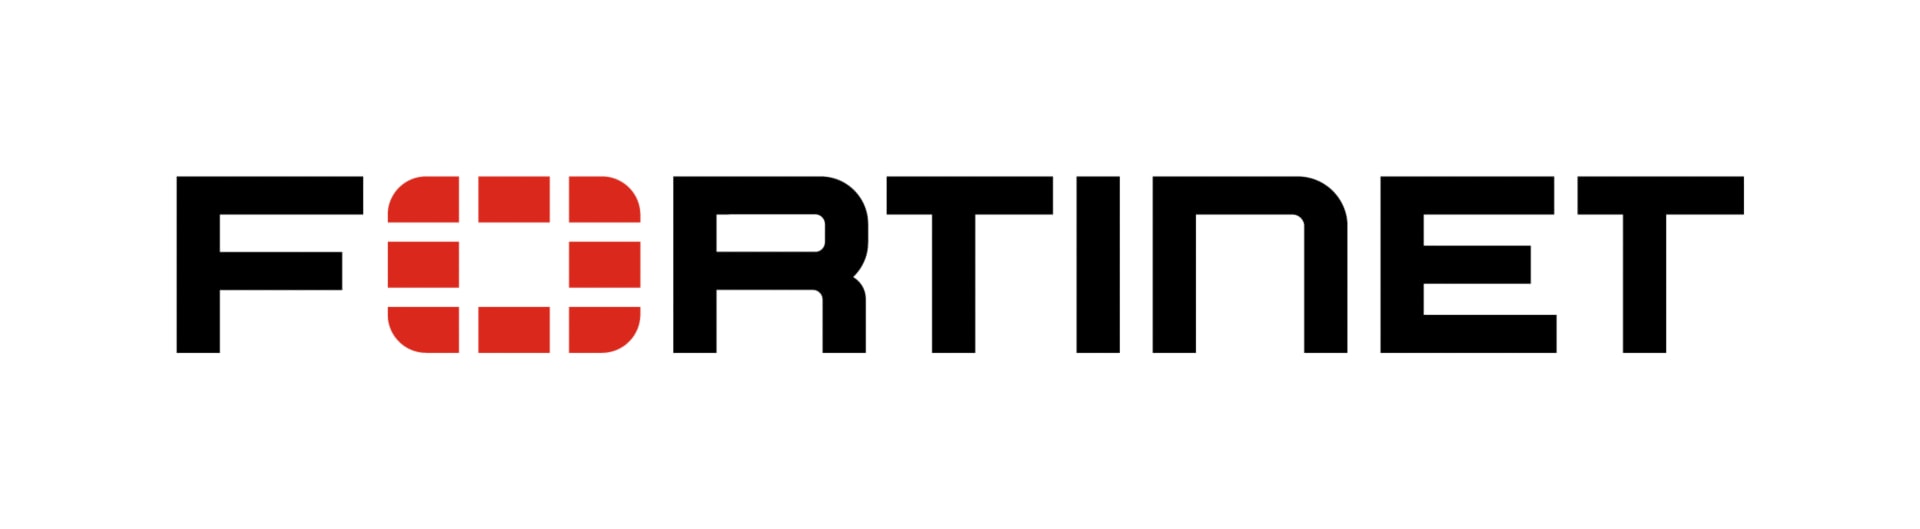 Fortinet FortiCare 24x7 - technical support (renewal) - for FortiNAC Base -